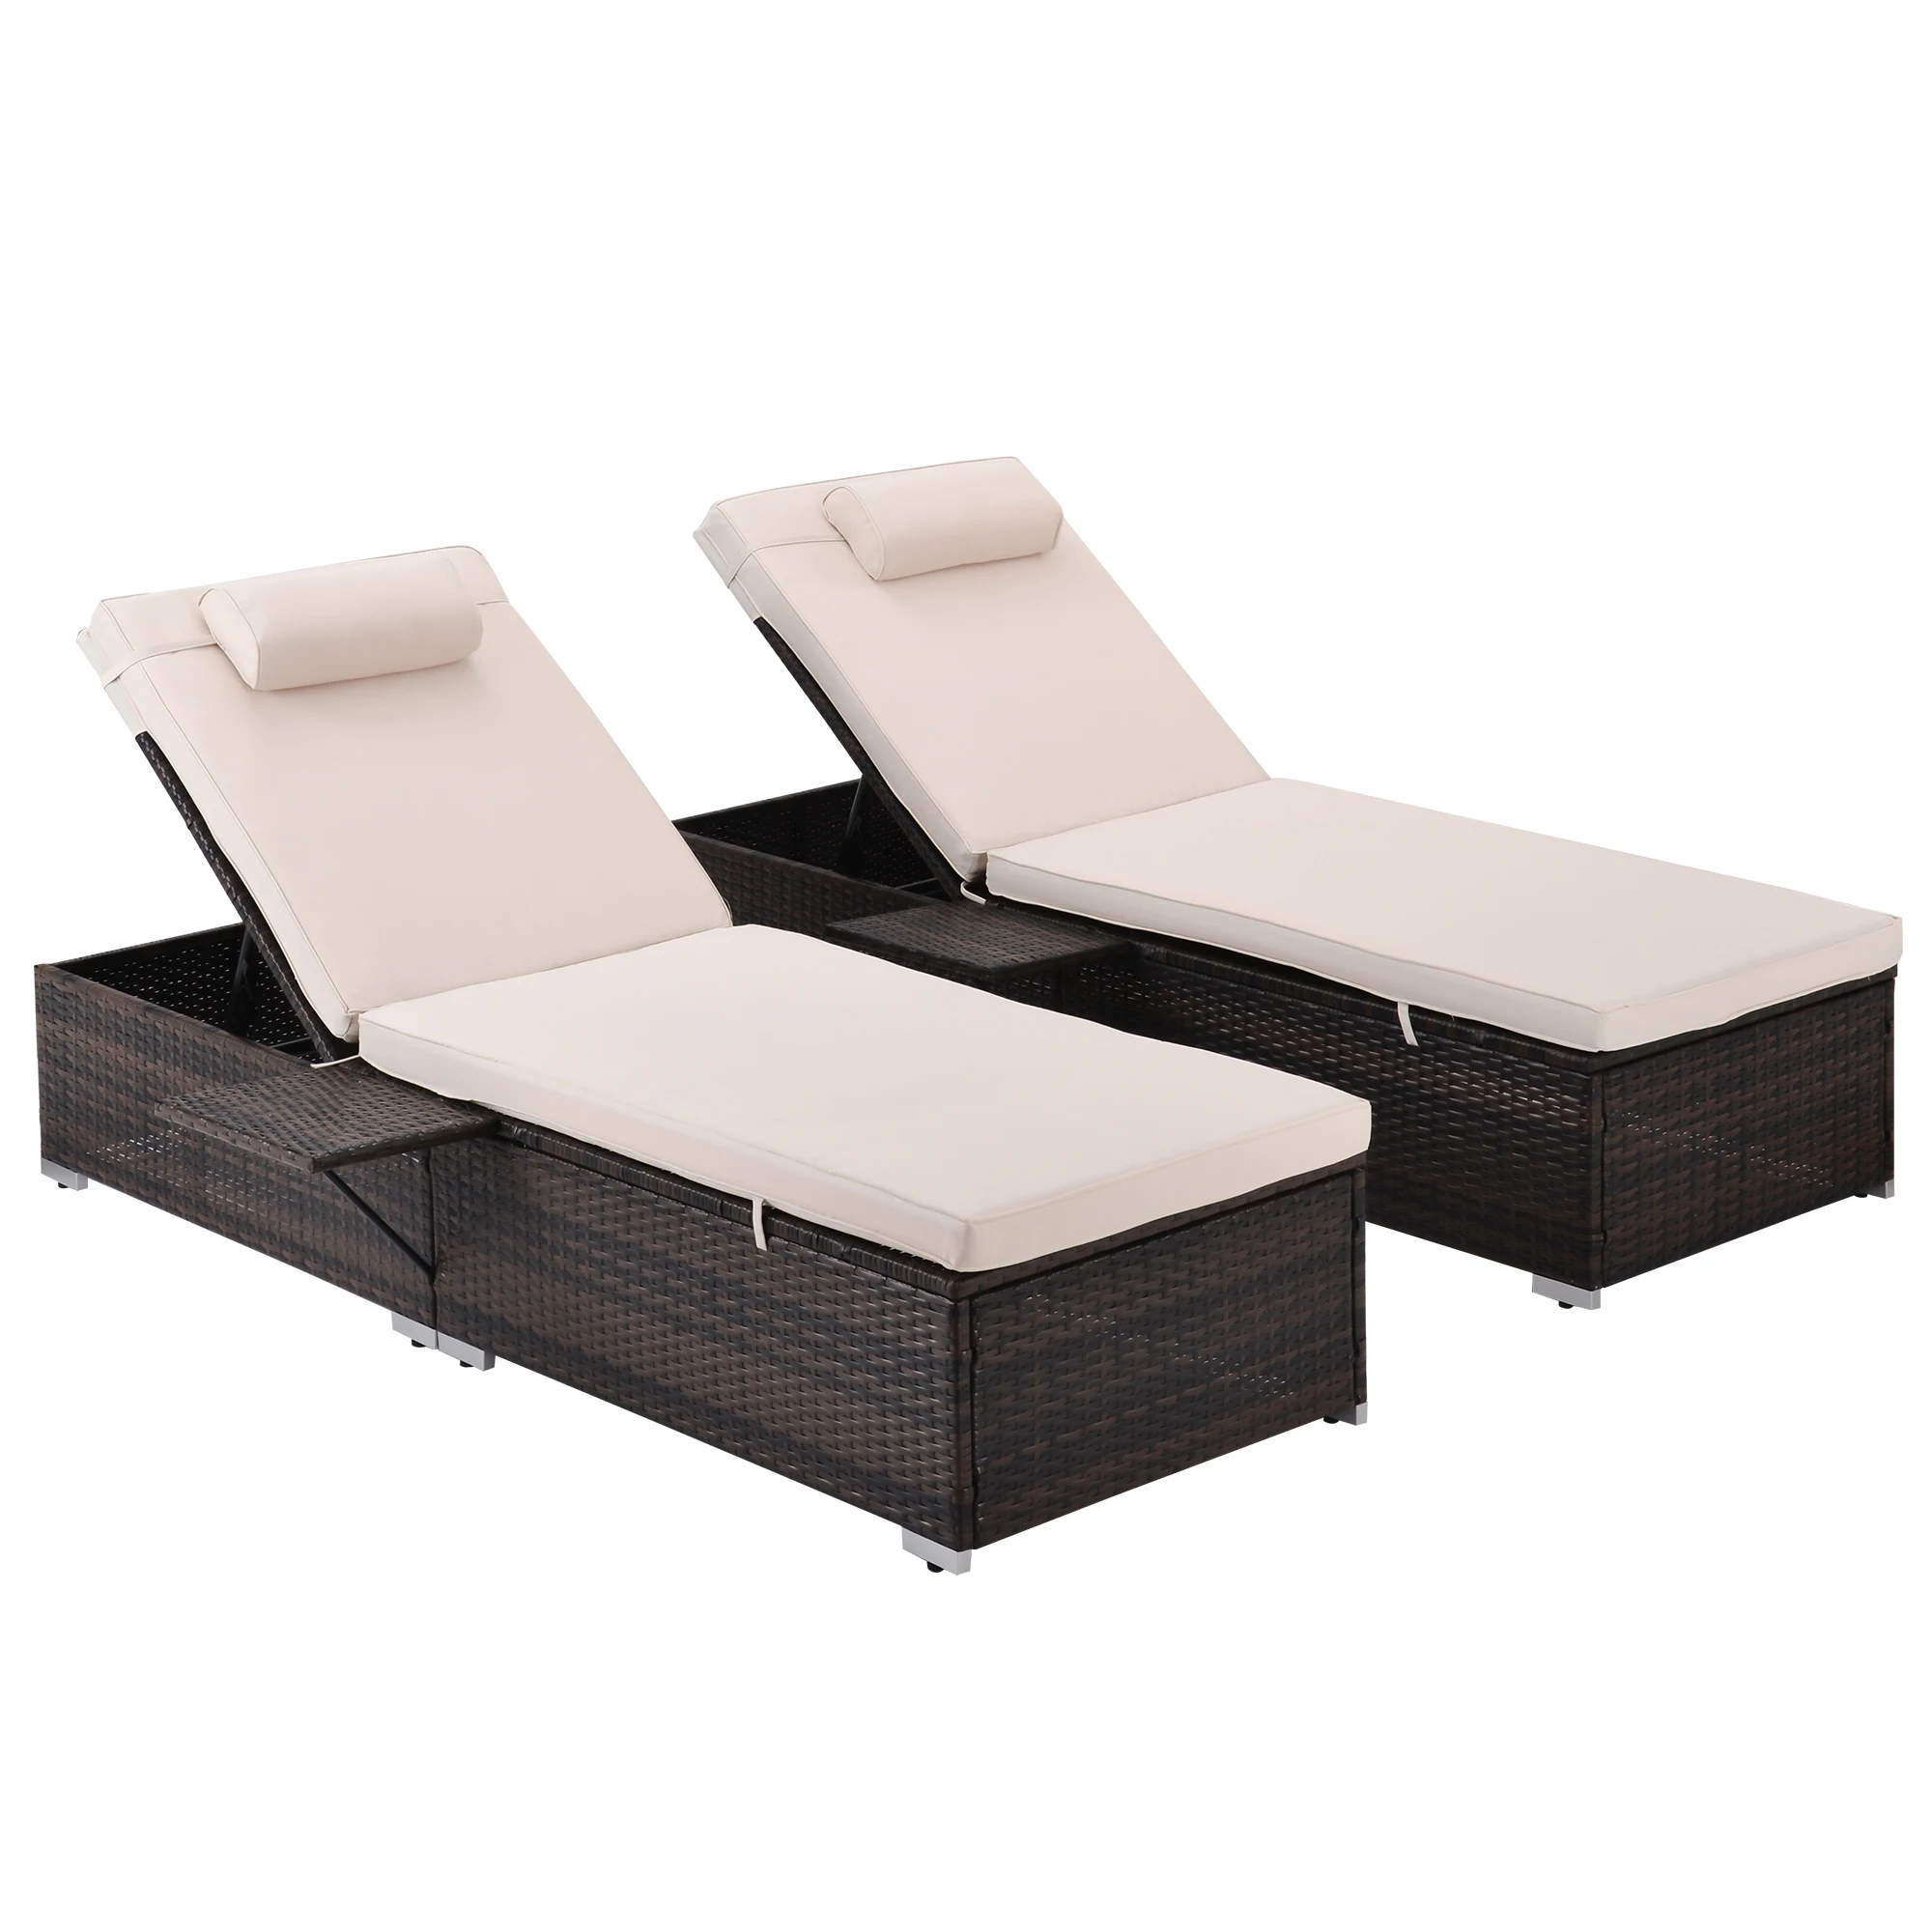 

Outdoor PE Wicker Chaise Lounge 2 Piece Patio Brown Rattan Reclining Chair Furniture Set Beach Pool Backrest Recliners